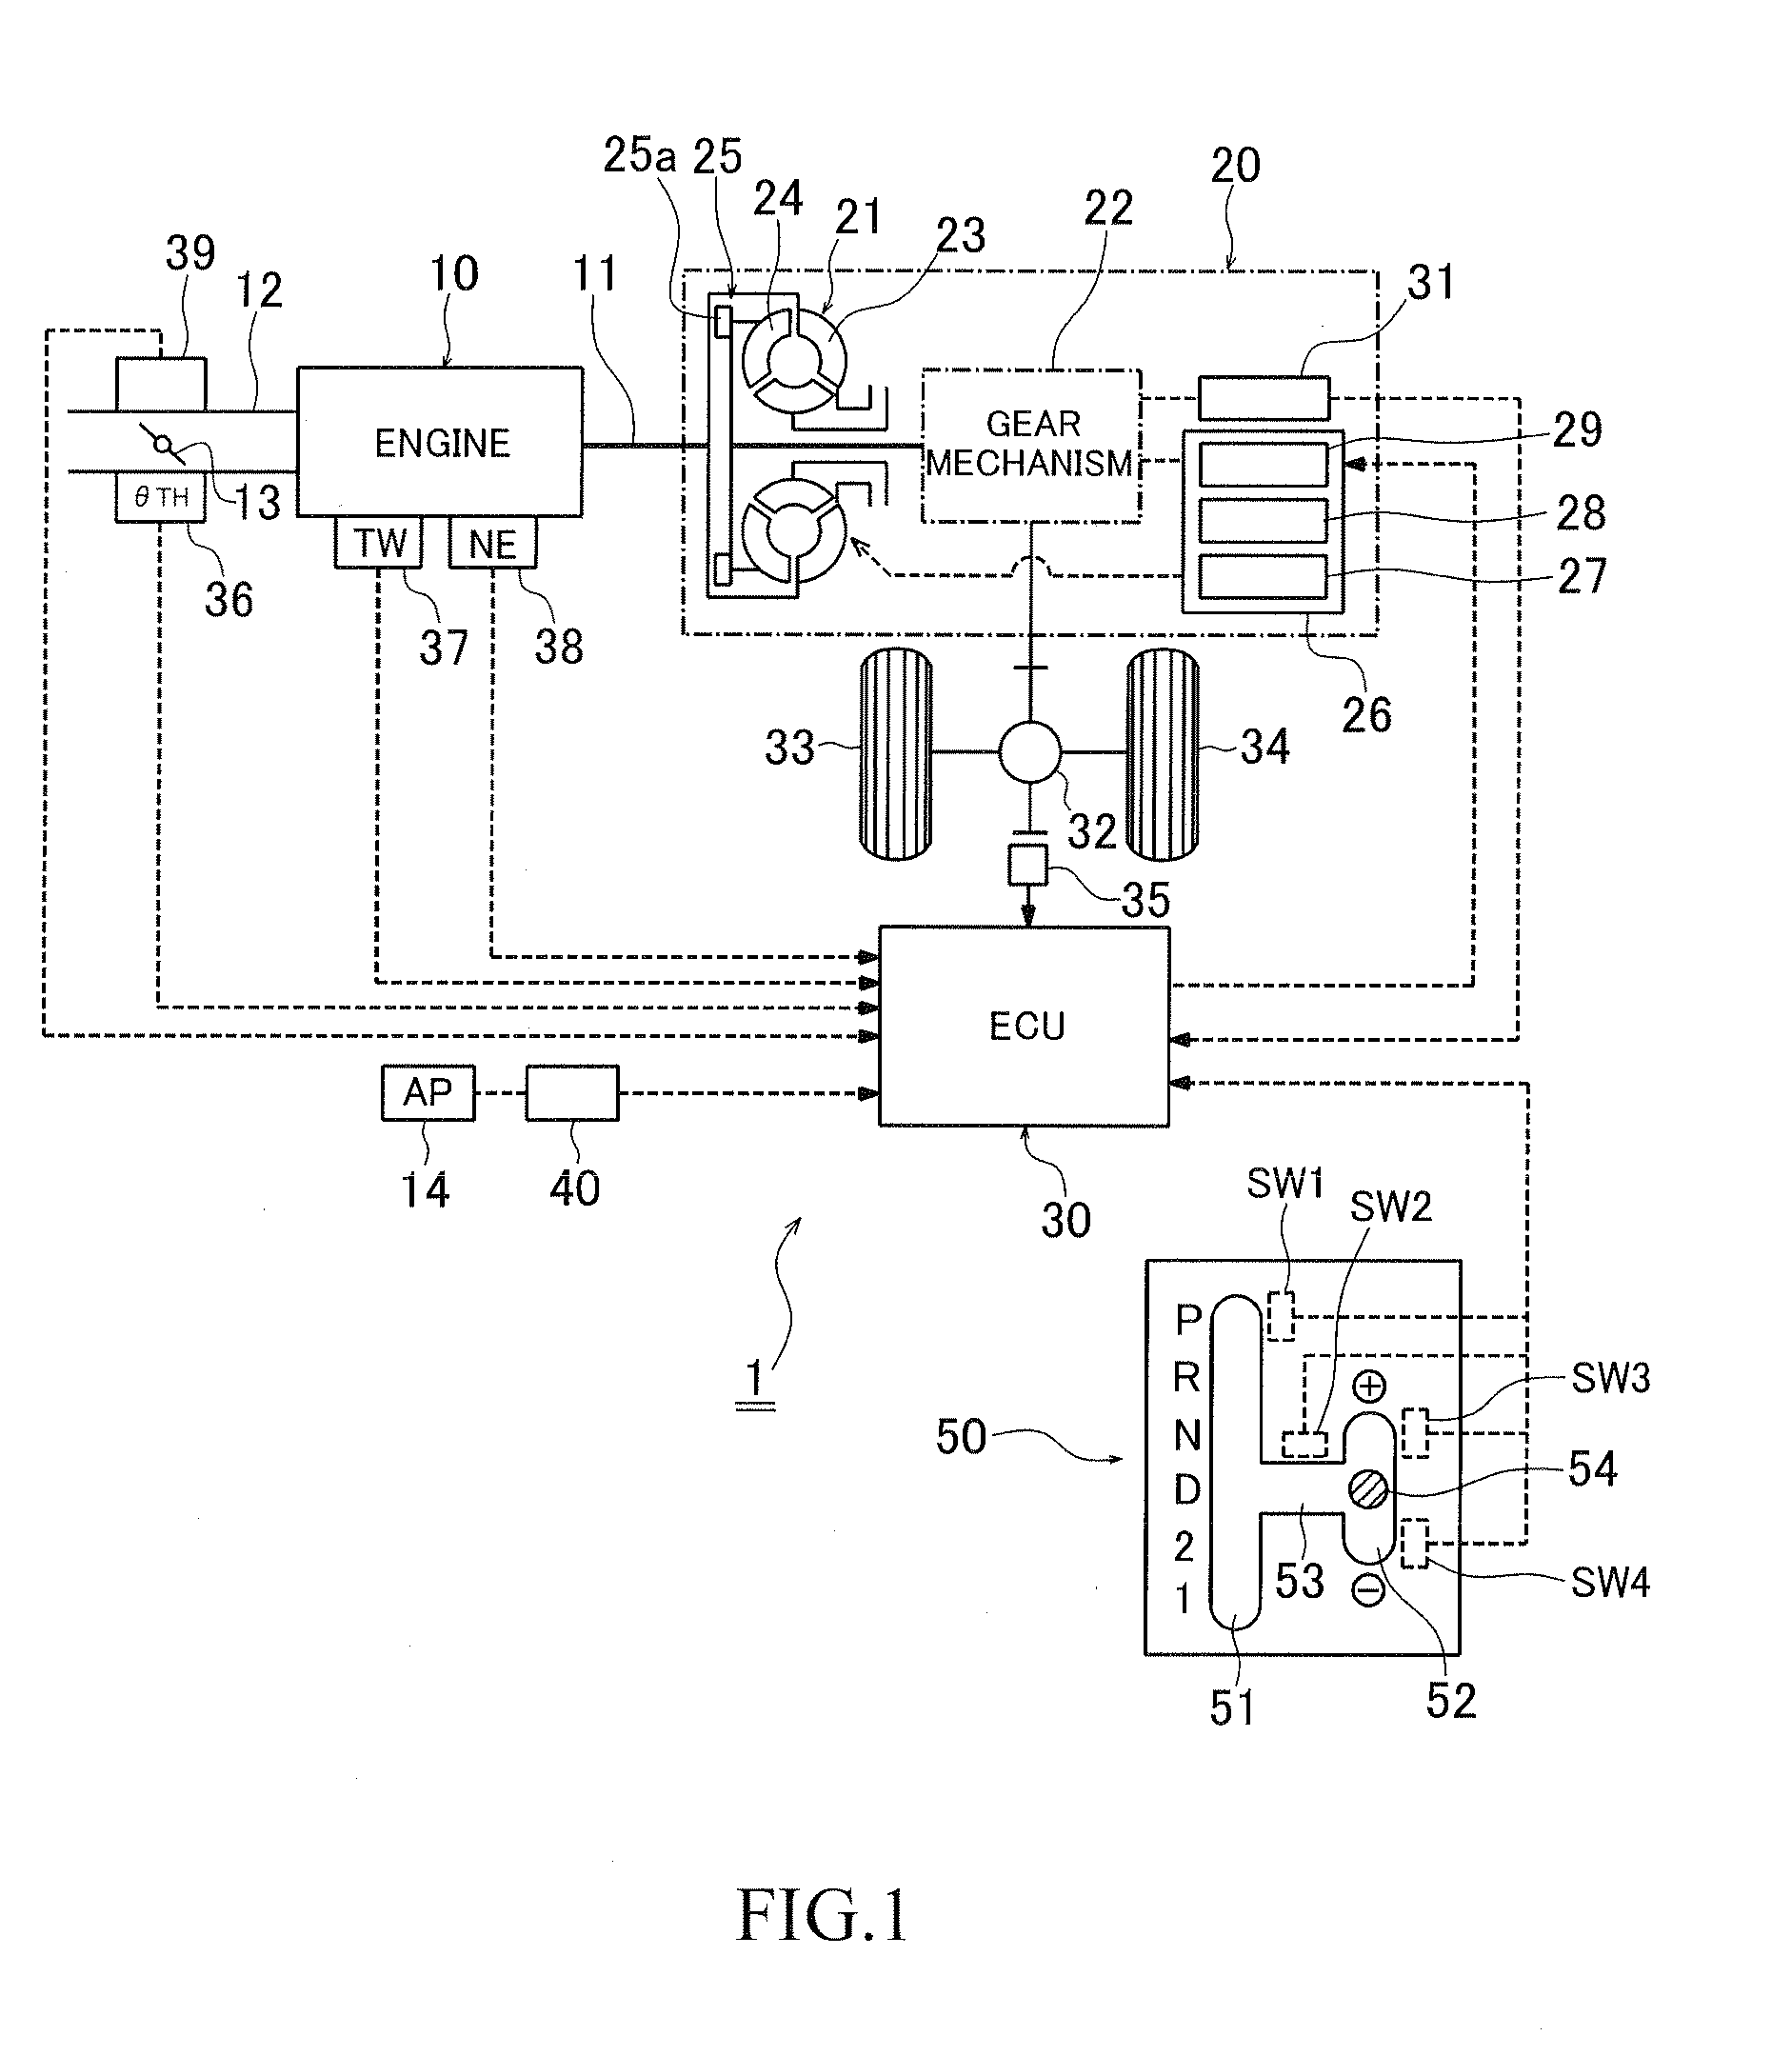 Control device for automatic transmission of vehicle